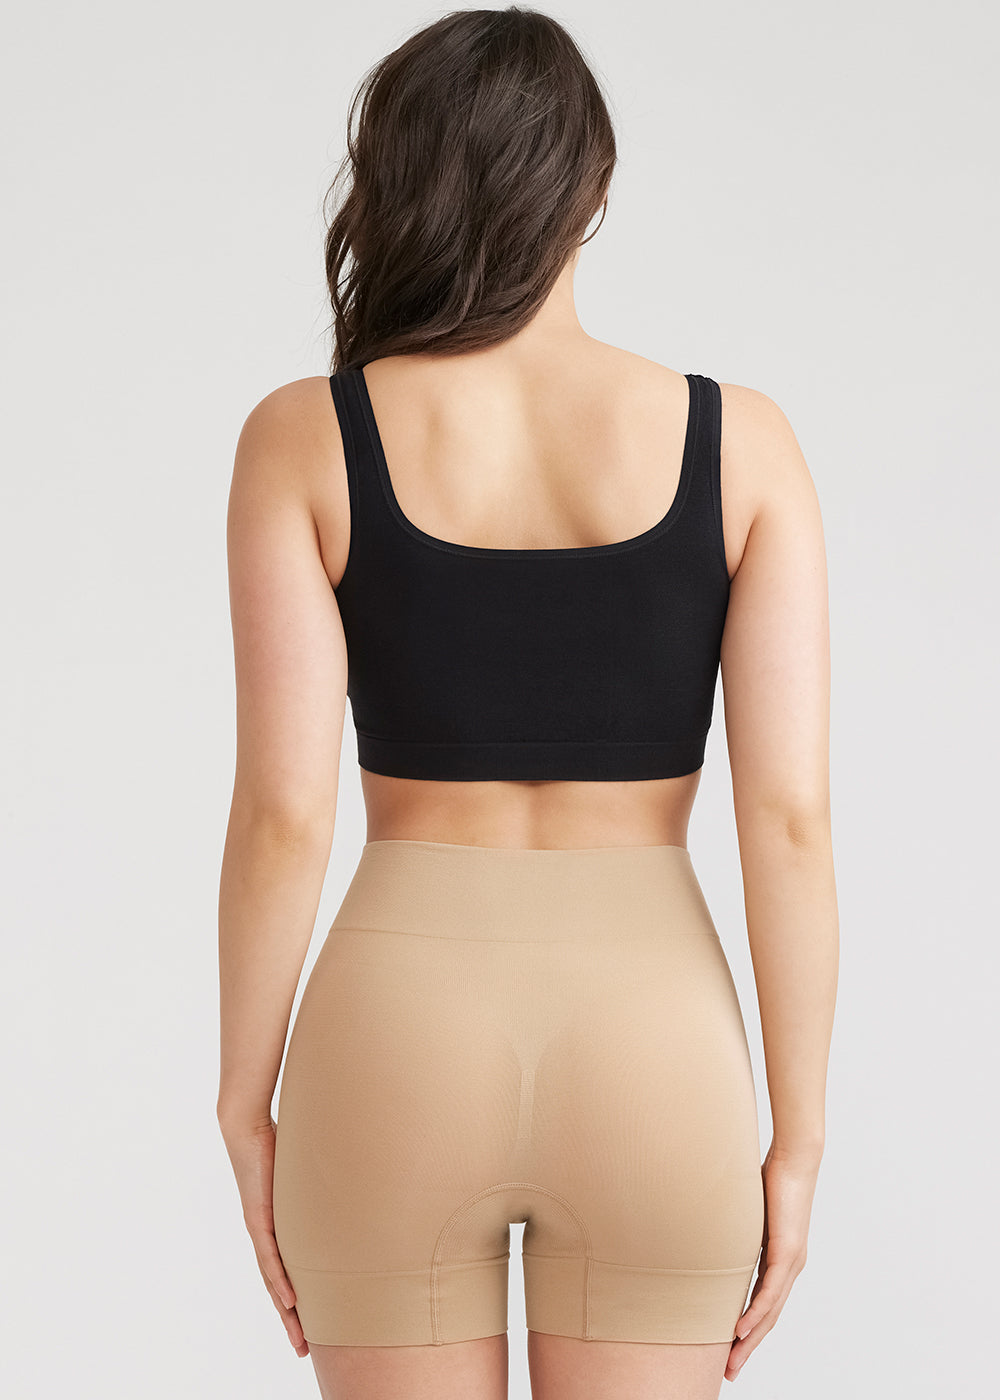 Bria Comfortably Curved Smoothing Short - Seamless